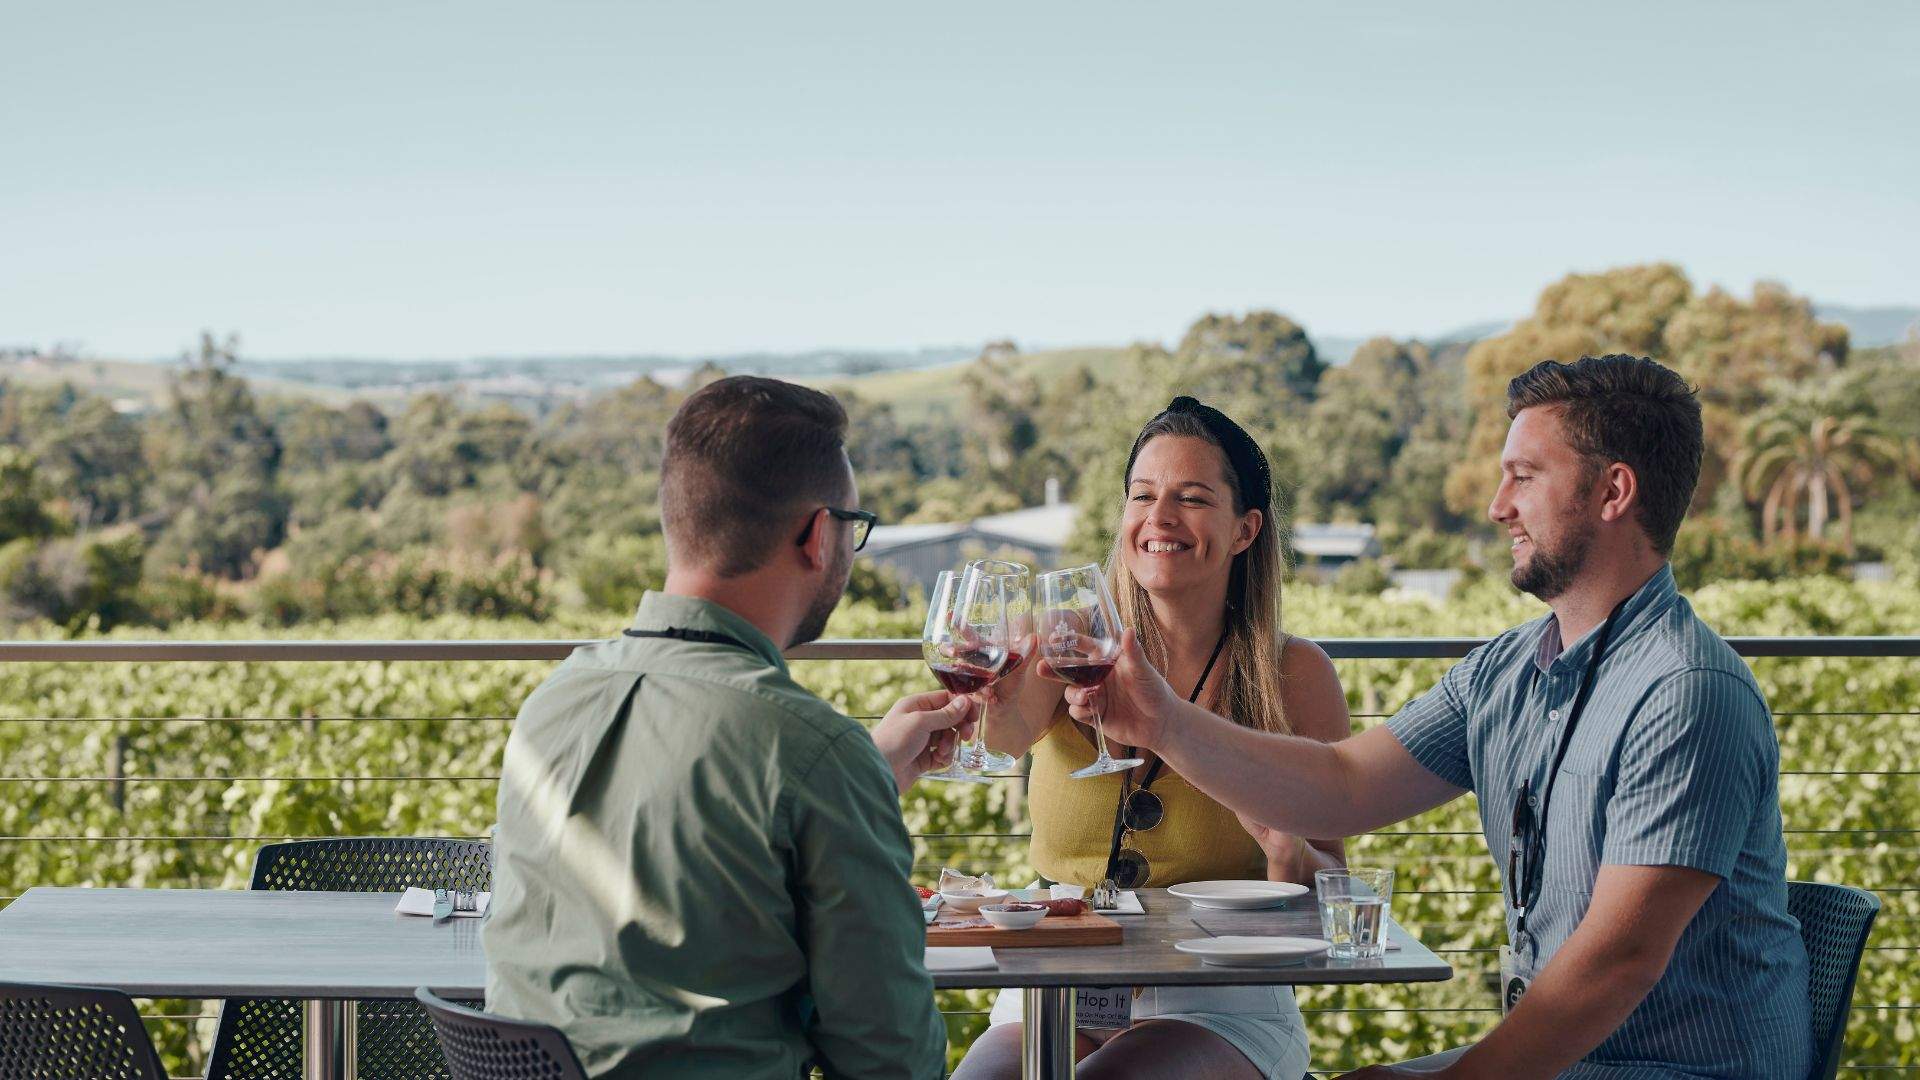 The Bellarine Peninsula's New Hop-On-Hop-Off Bus Lets You Choose Your Own Winery-Hopping Adventure